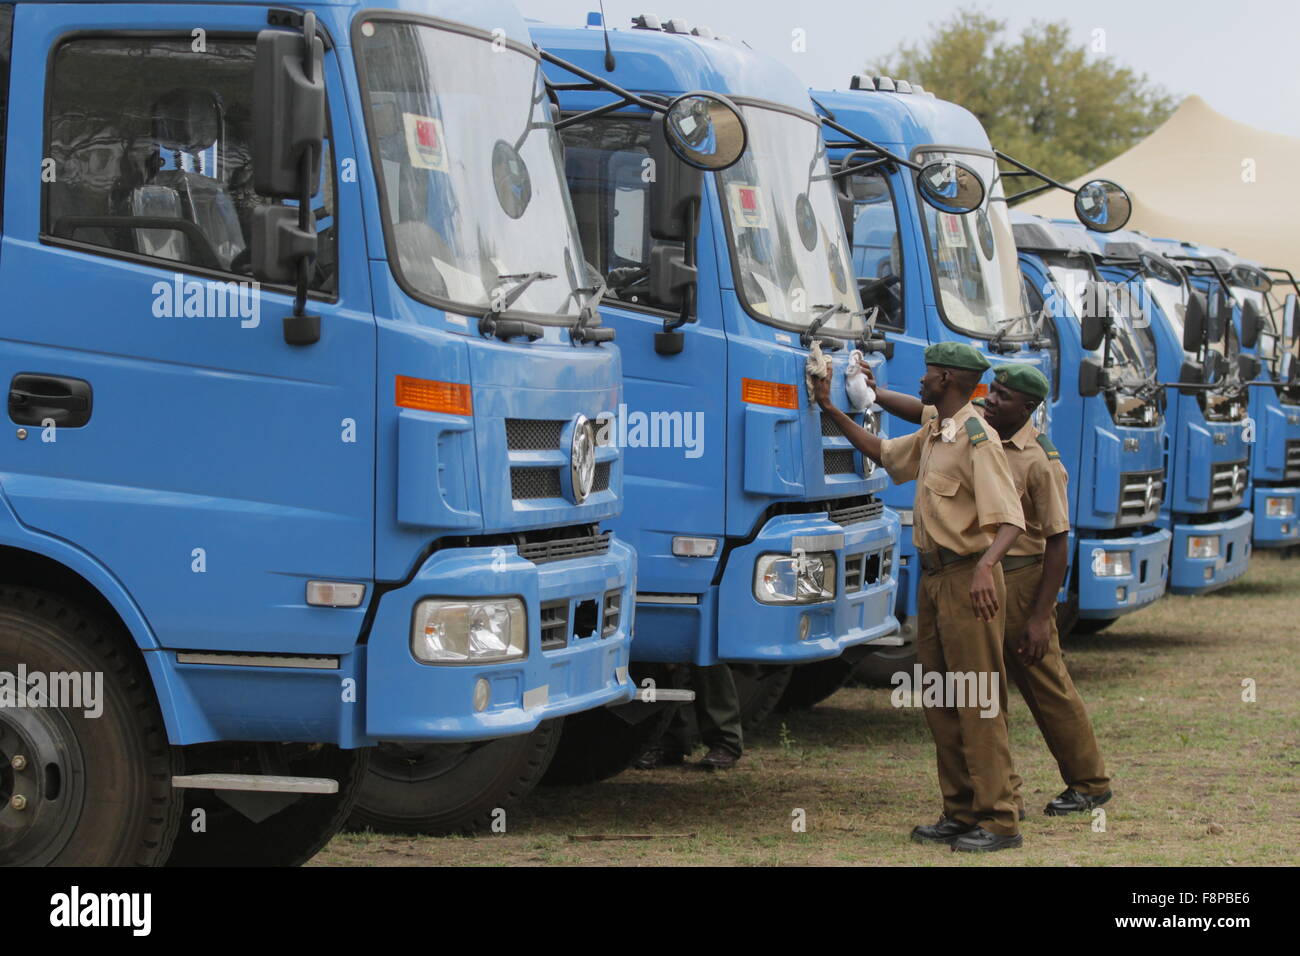 Hwange, Zimbabwe. 10th Dec, 2015. Officers of Zimbabwe National Parks and Wildlife Management Authority clean vehicles donated by China in Hwange National Park, Zimbabwe, Dec. 10, 2015. China on Thursday handed over vehicles and equipment to Zimbabwe to help the cash-strapped government fight against wildlife poaching, implementing a wildlife protection cooperation agreement signed during Chinese President Xi Jinping's visit to Harare last week. Credit:  Xu Lingui/Xinhua/Alamy Live News Stock Photo